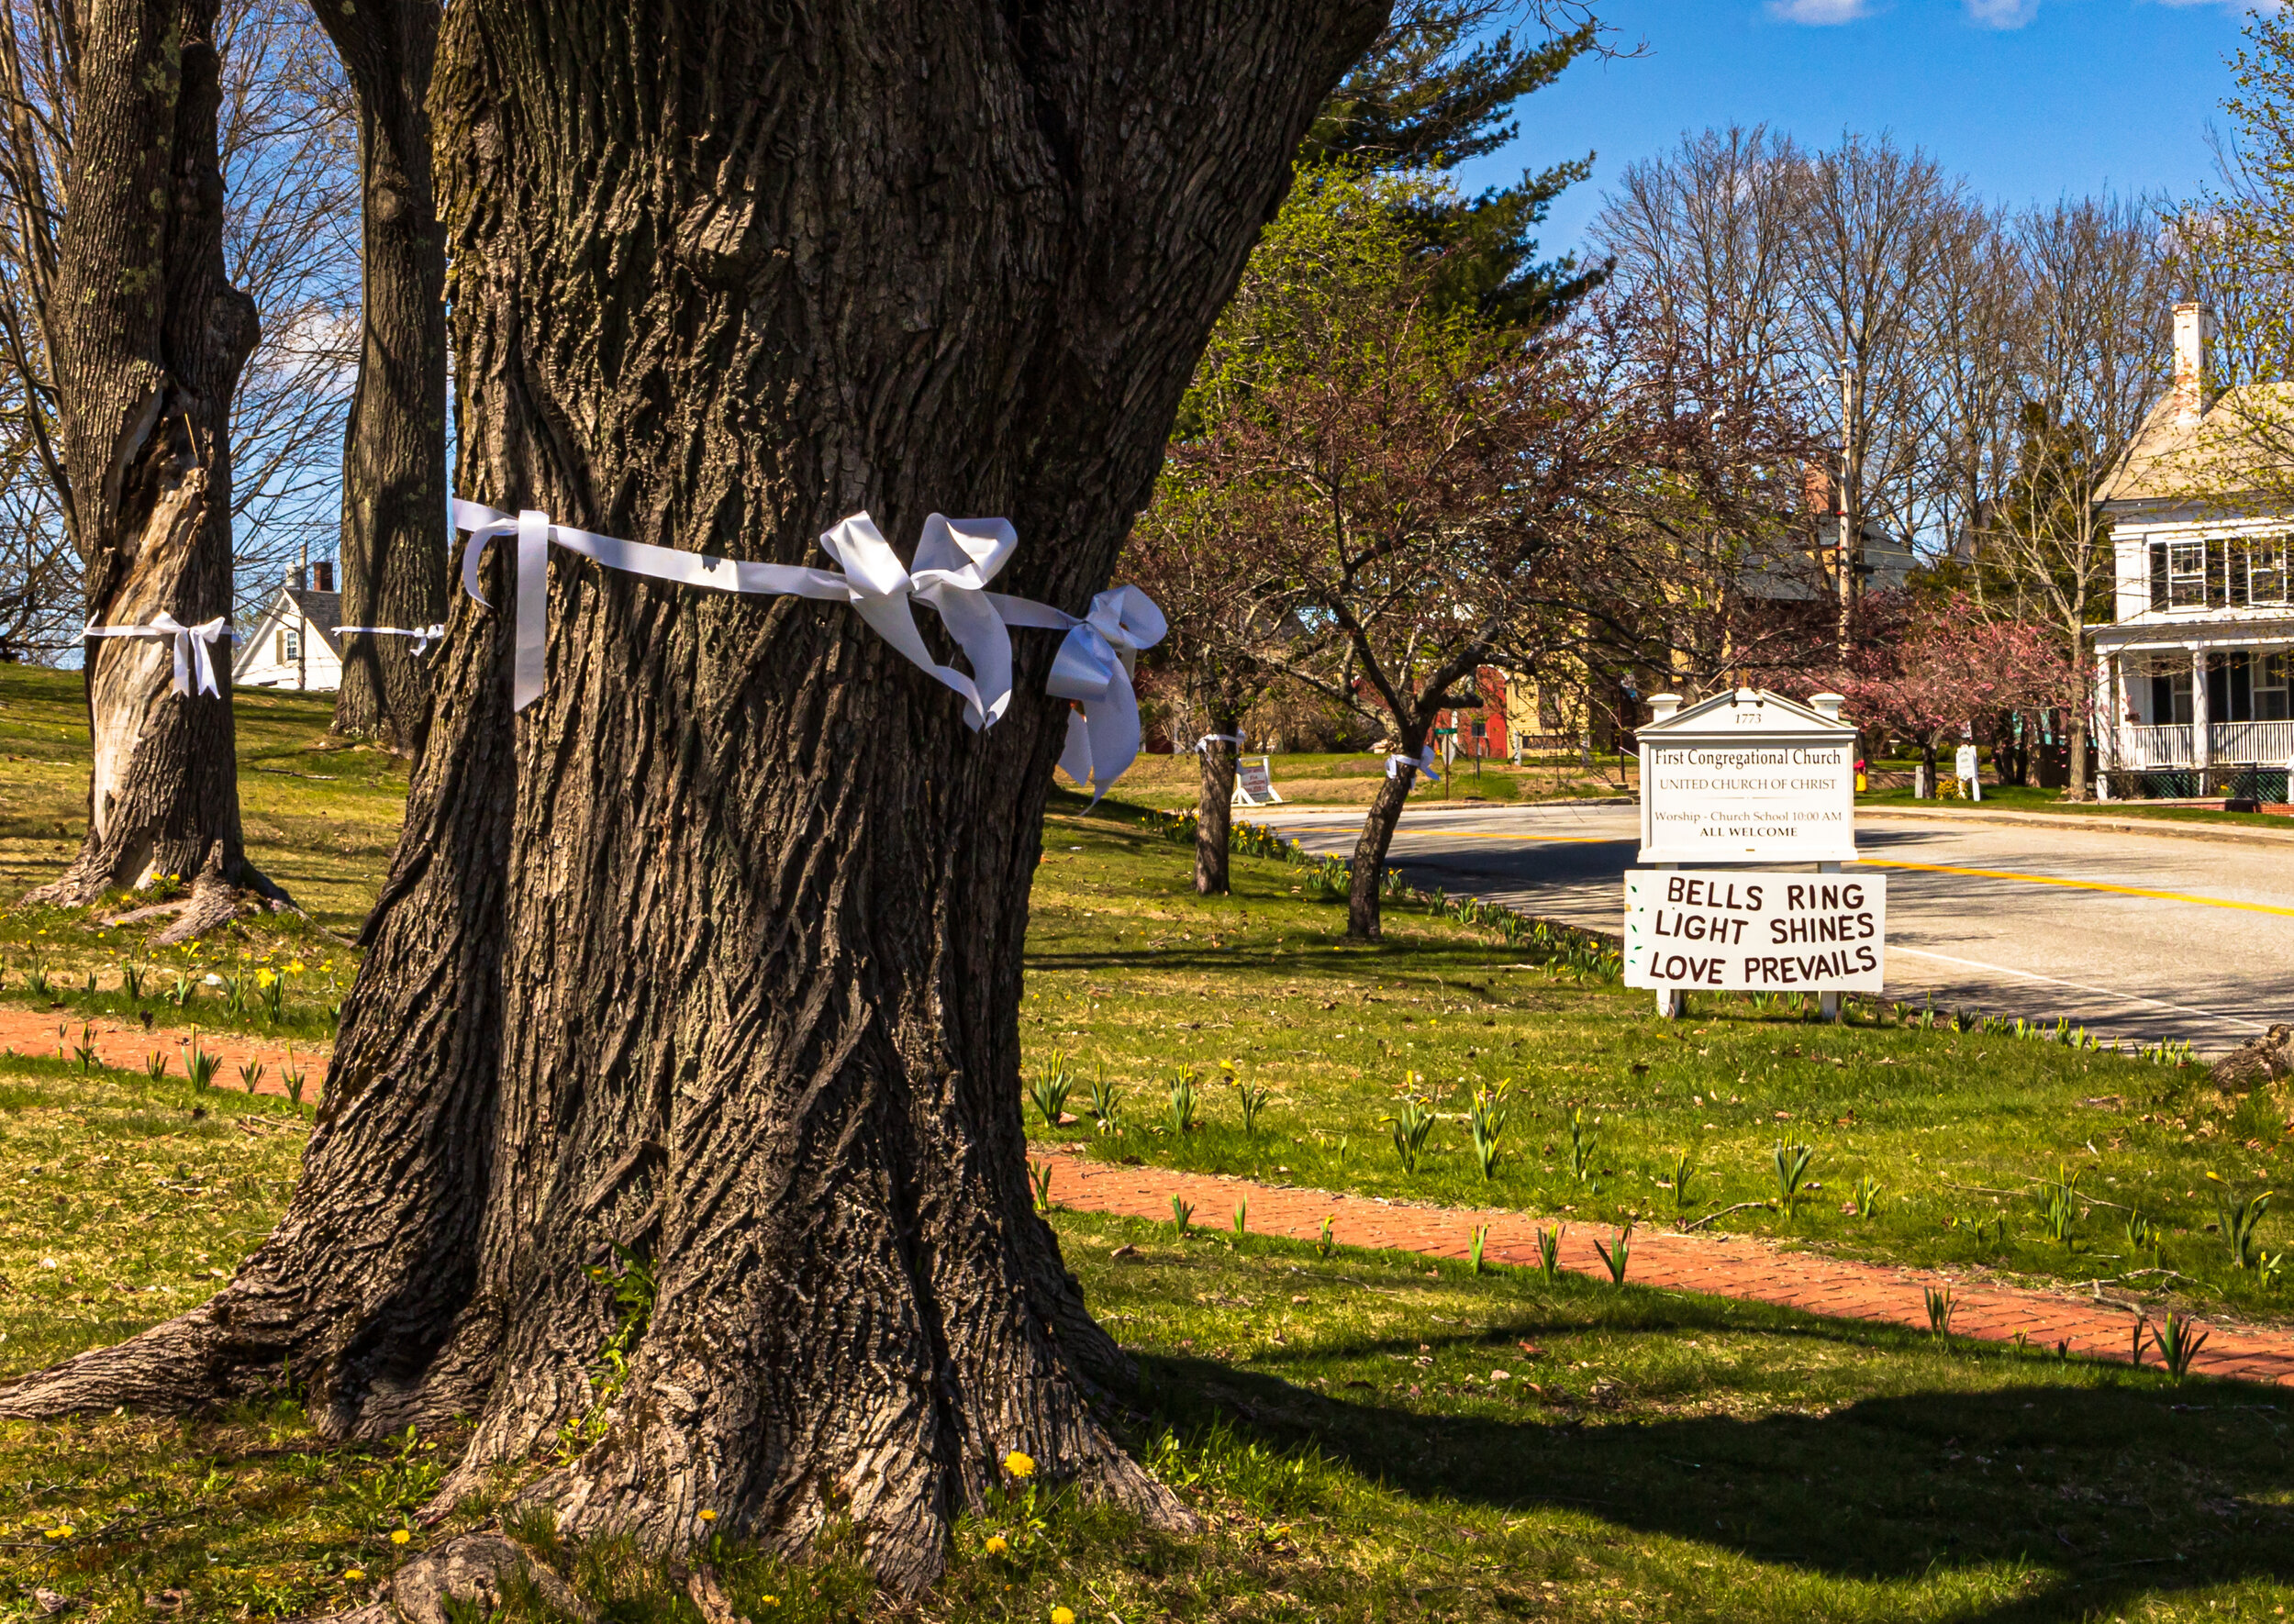 White Ribbons on Trees in Wiscassett, Maine-May 2020.jpg